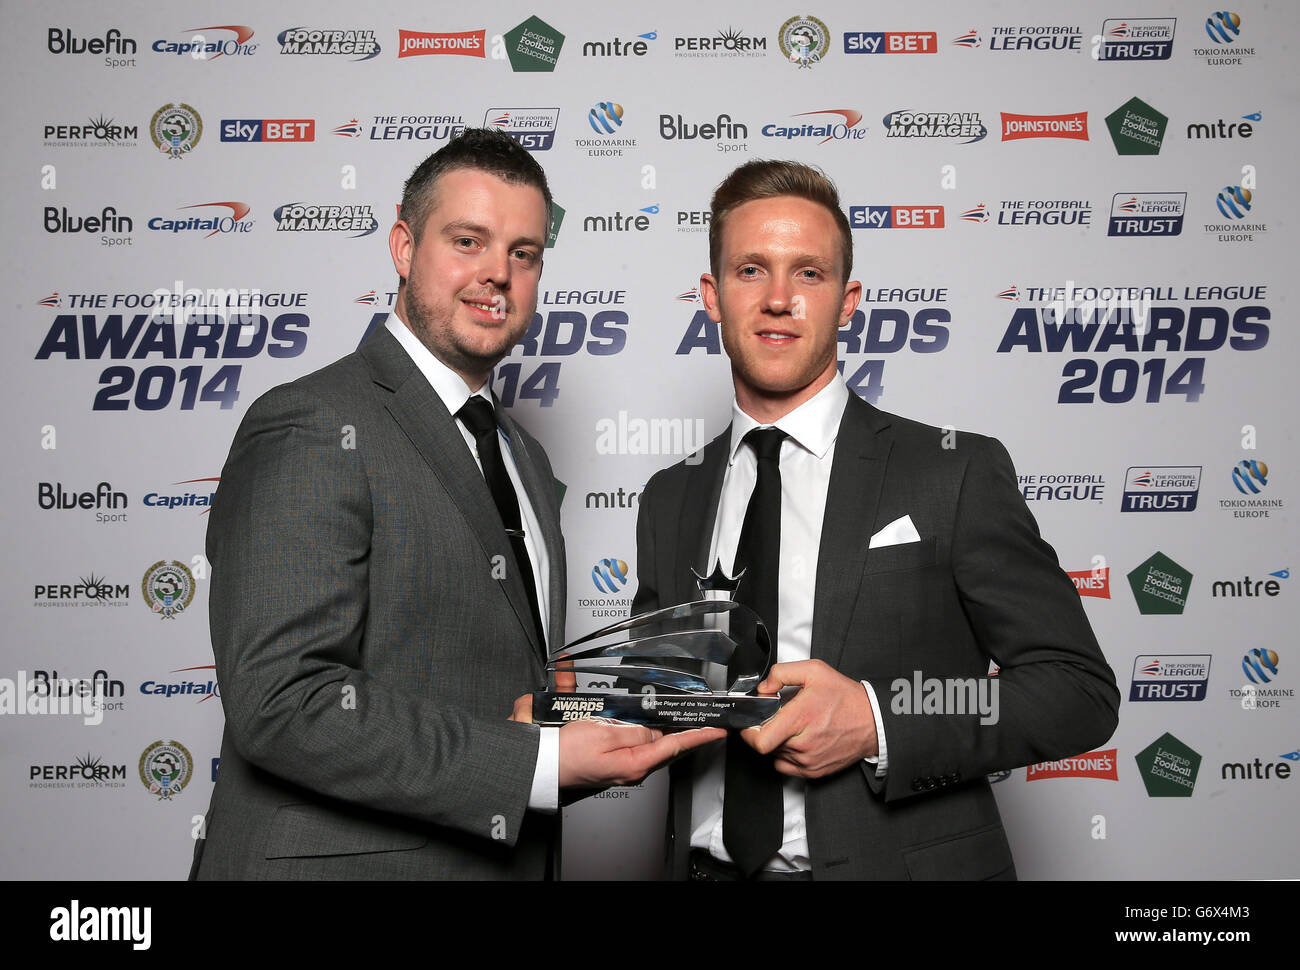 Brentford's Adam Forshaw (right) with his Sky Bet Player of the Year for League 1 award and sponsor Stock Photo